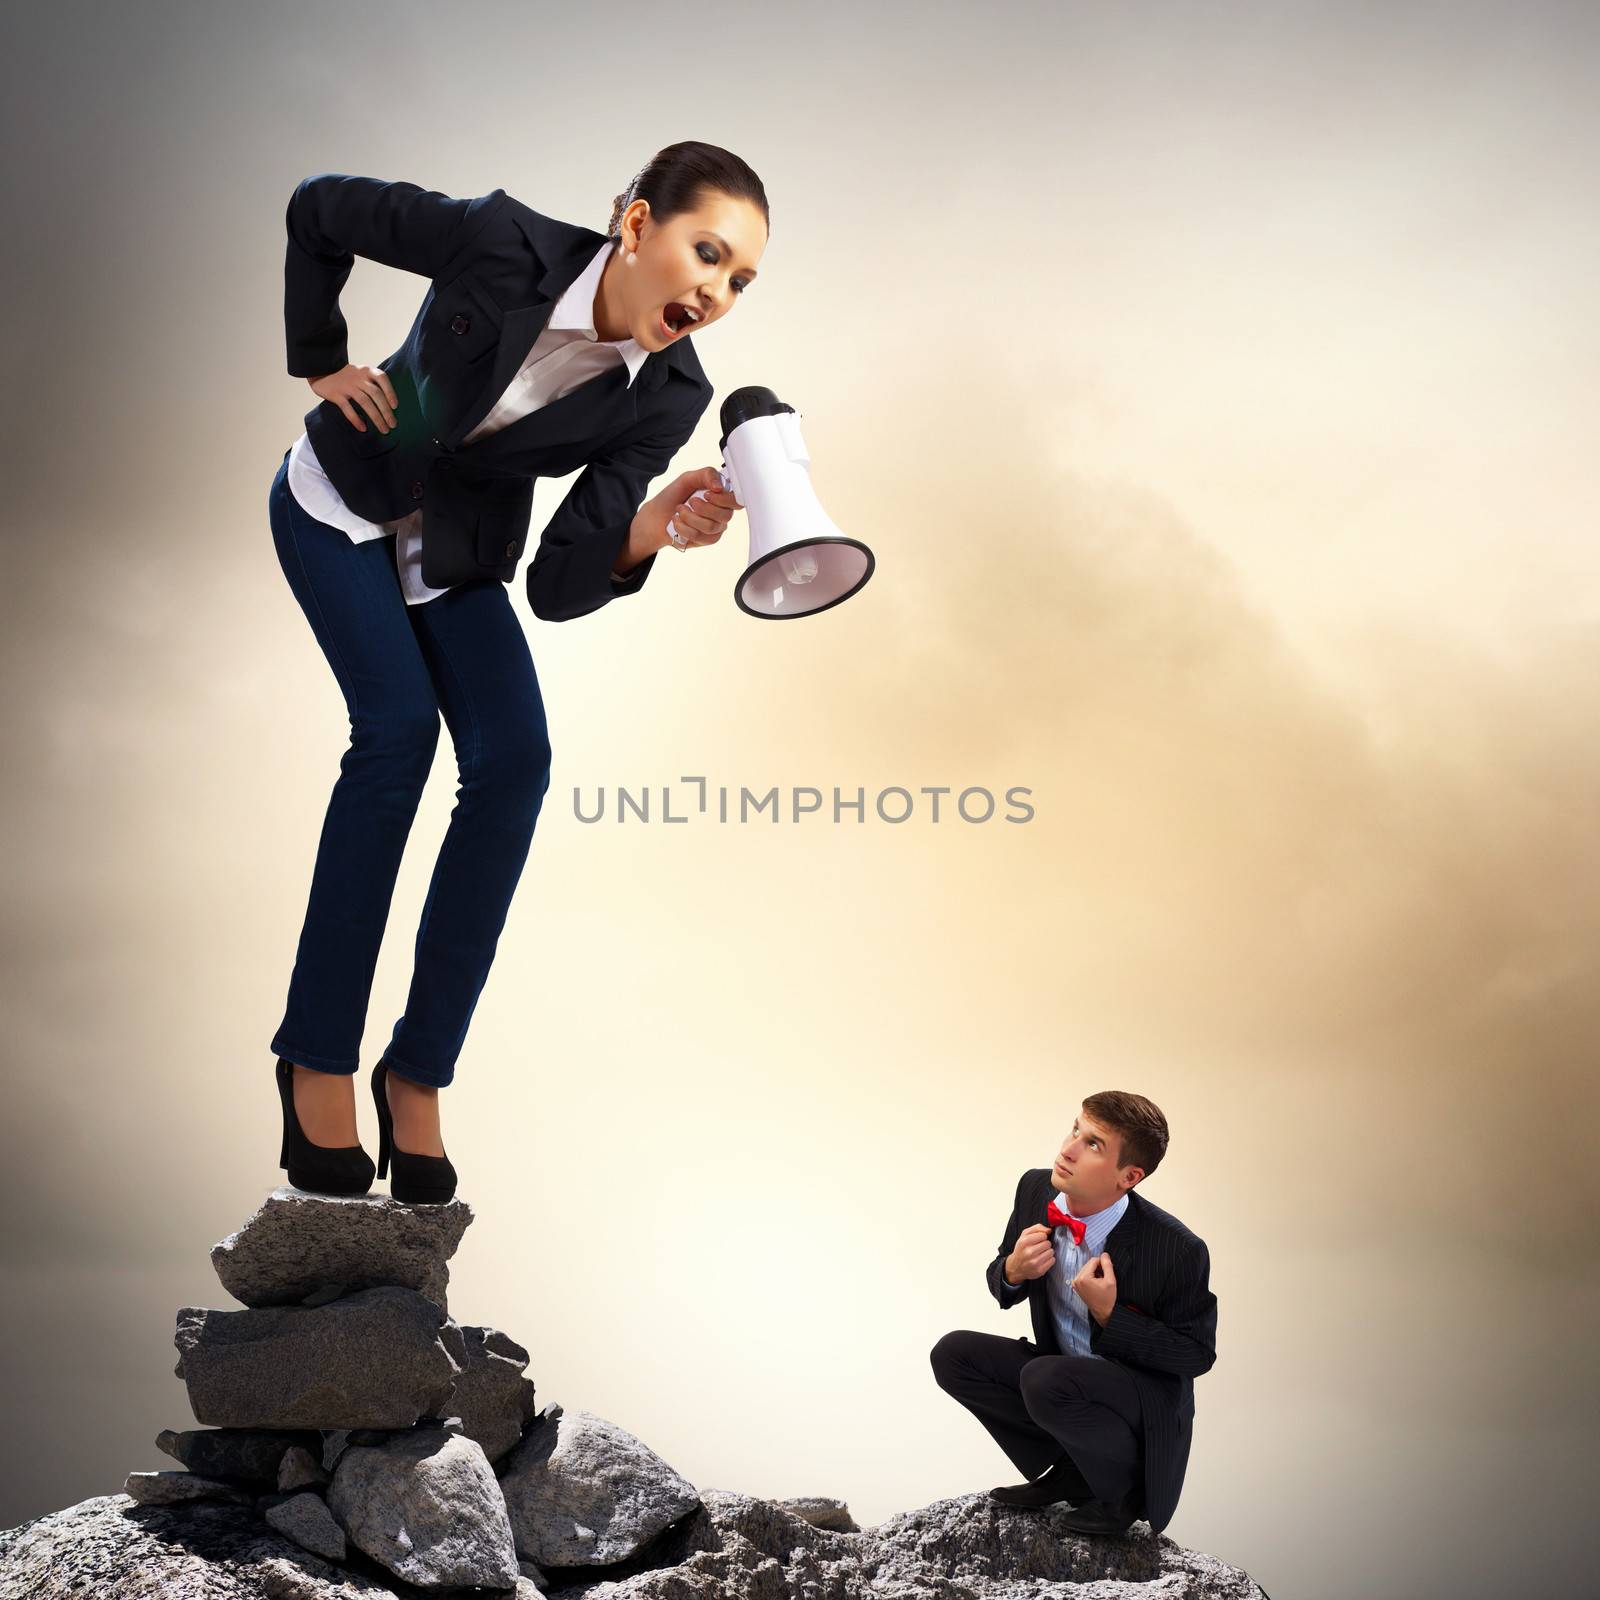 Angry businesswoman with megaphone shouting at colleague